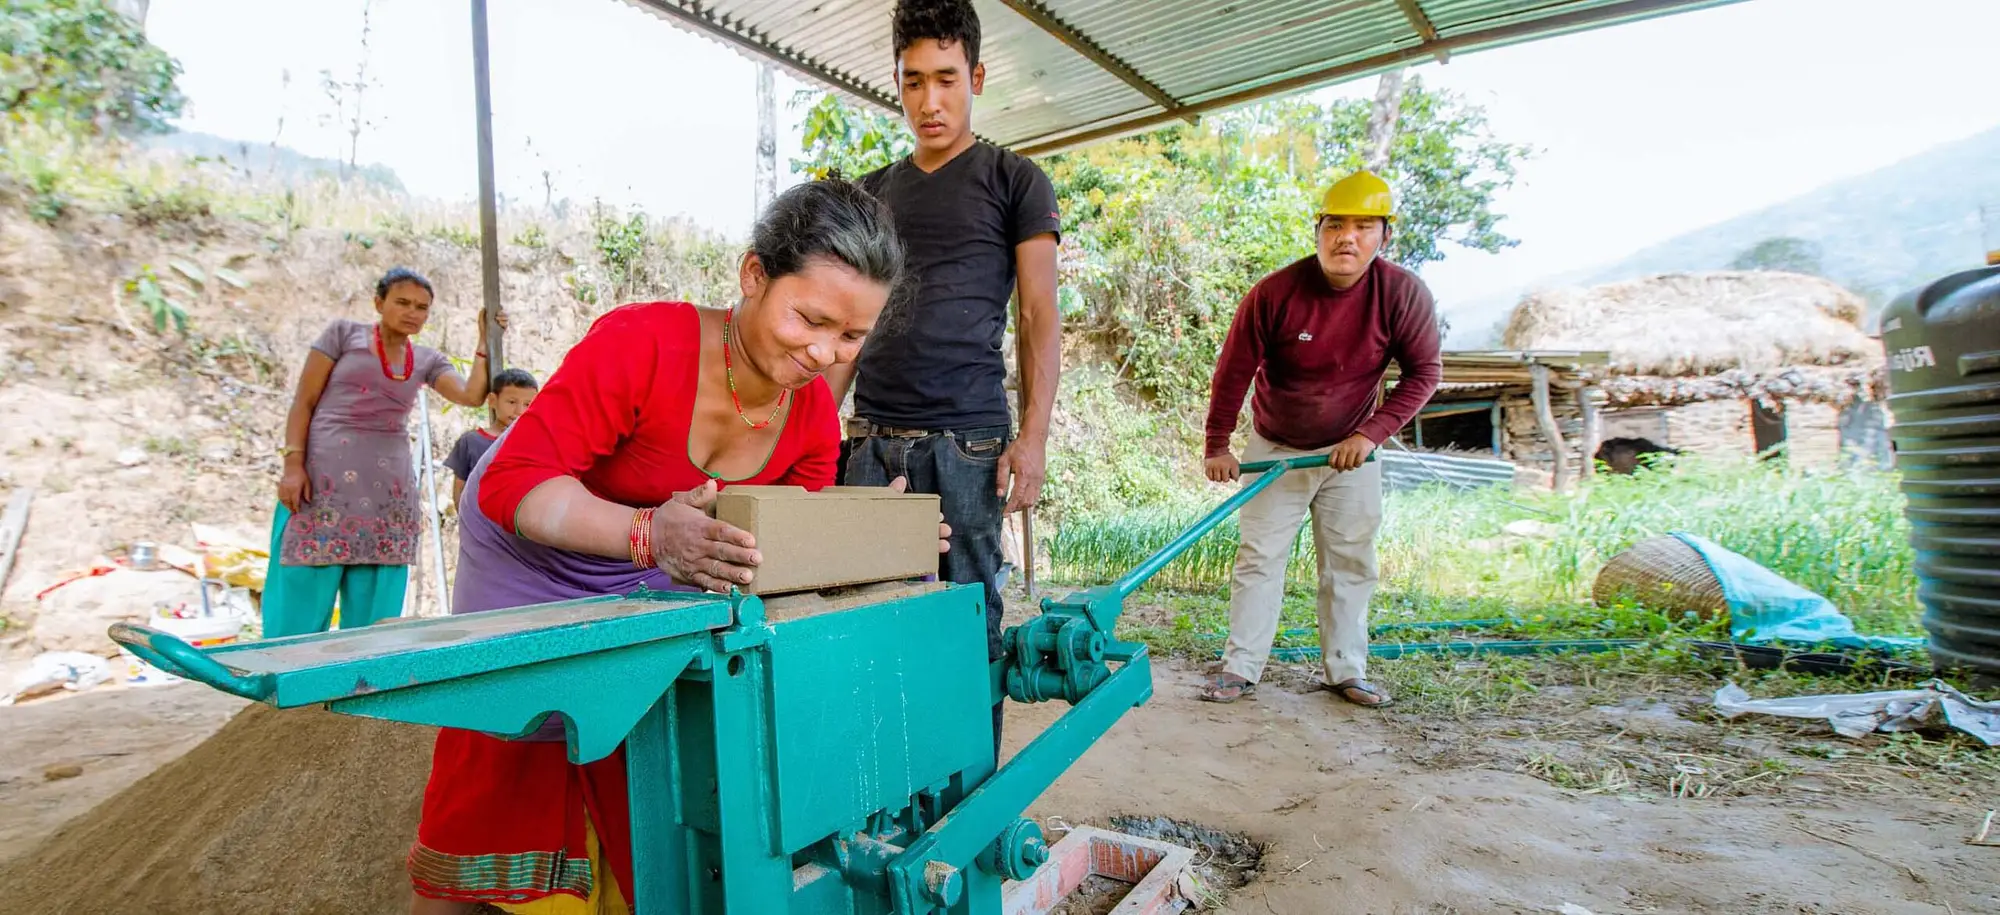 A woman makes a brick using Build Up Nepal's CSEB brick-making machine. A group of people look on, some in hard hats.